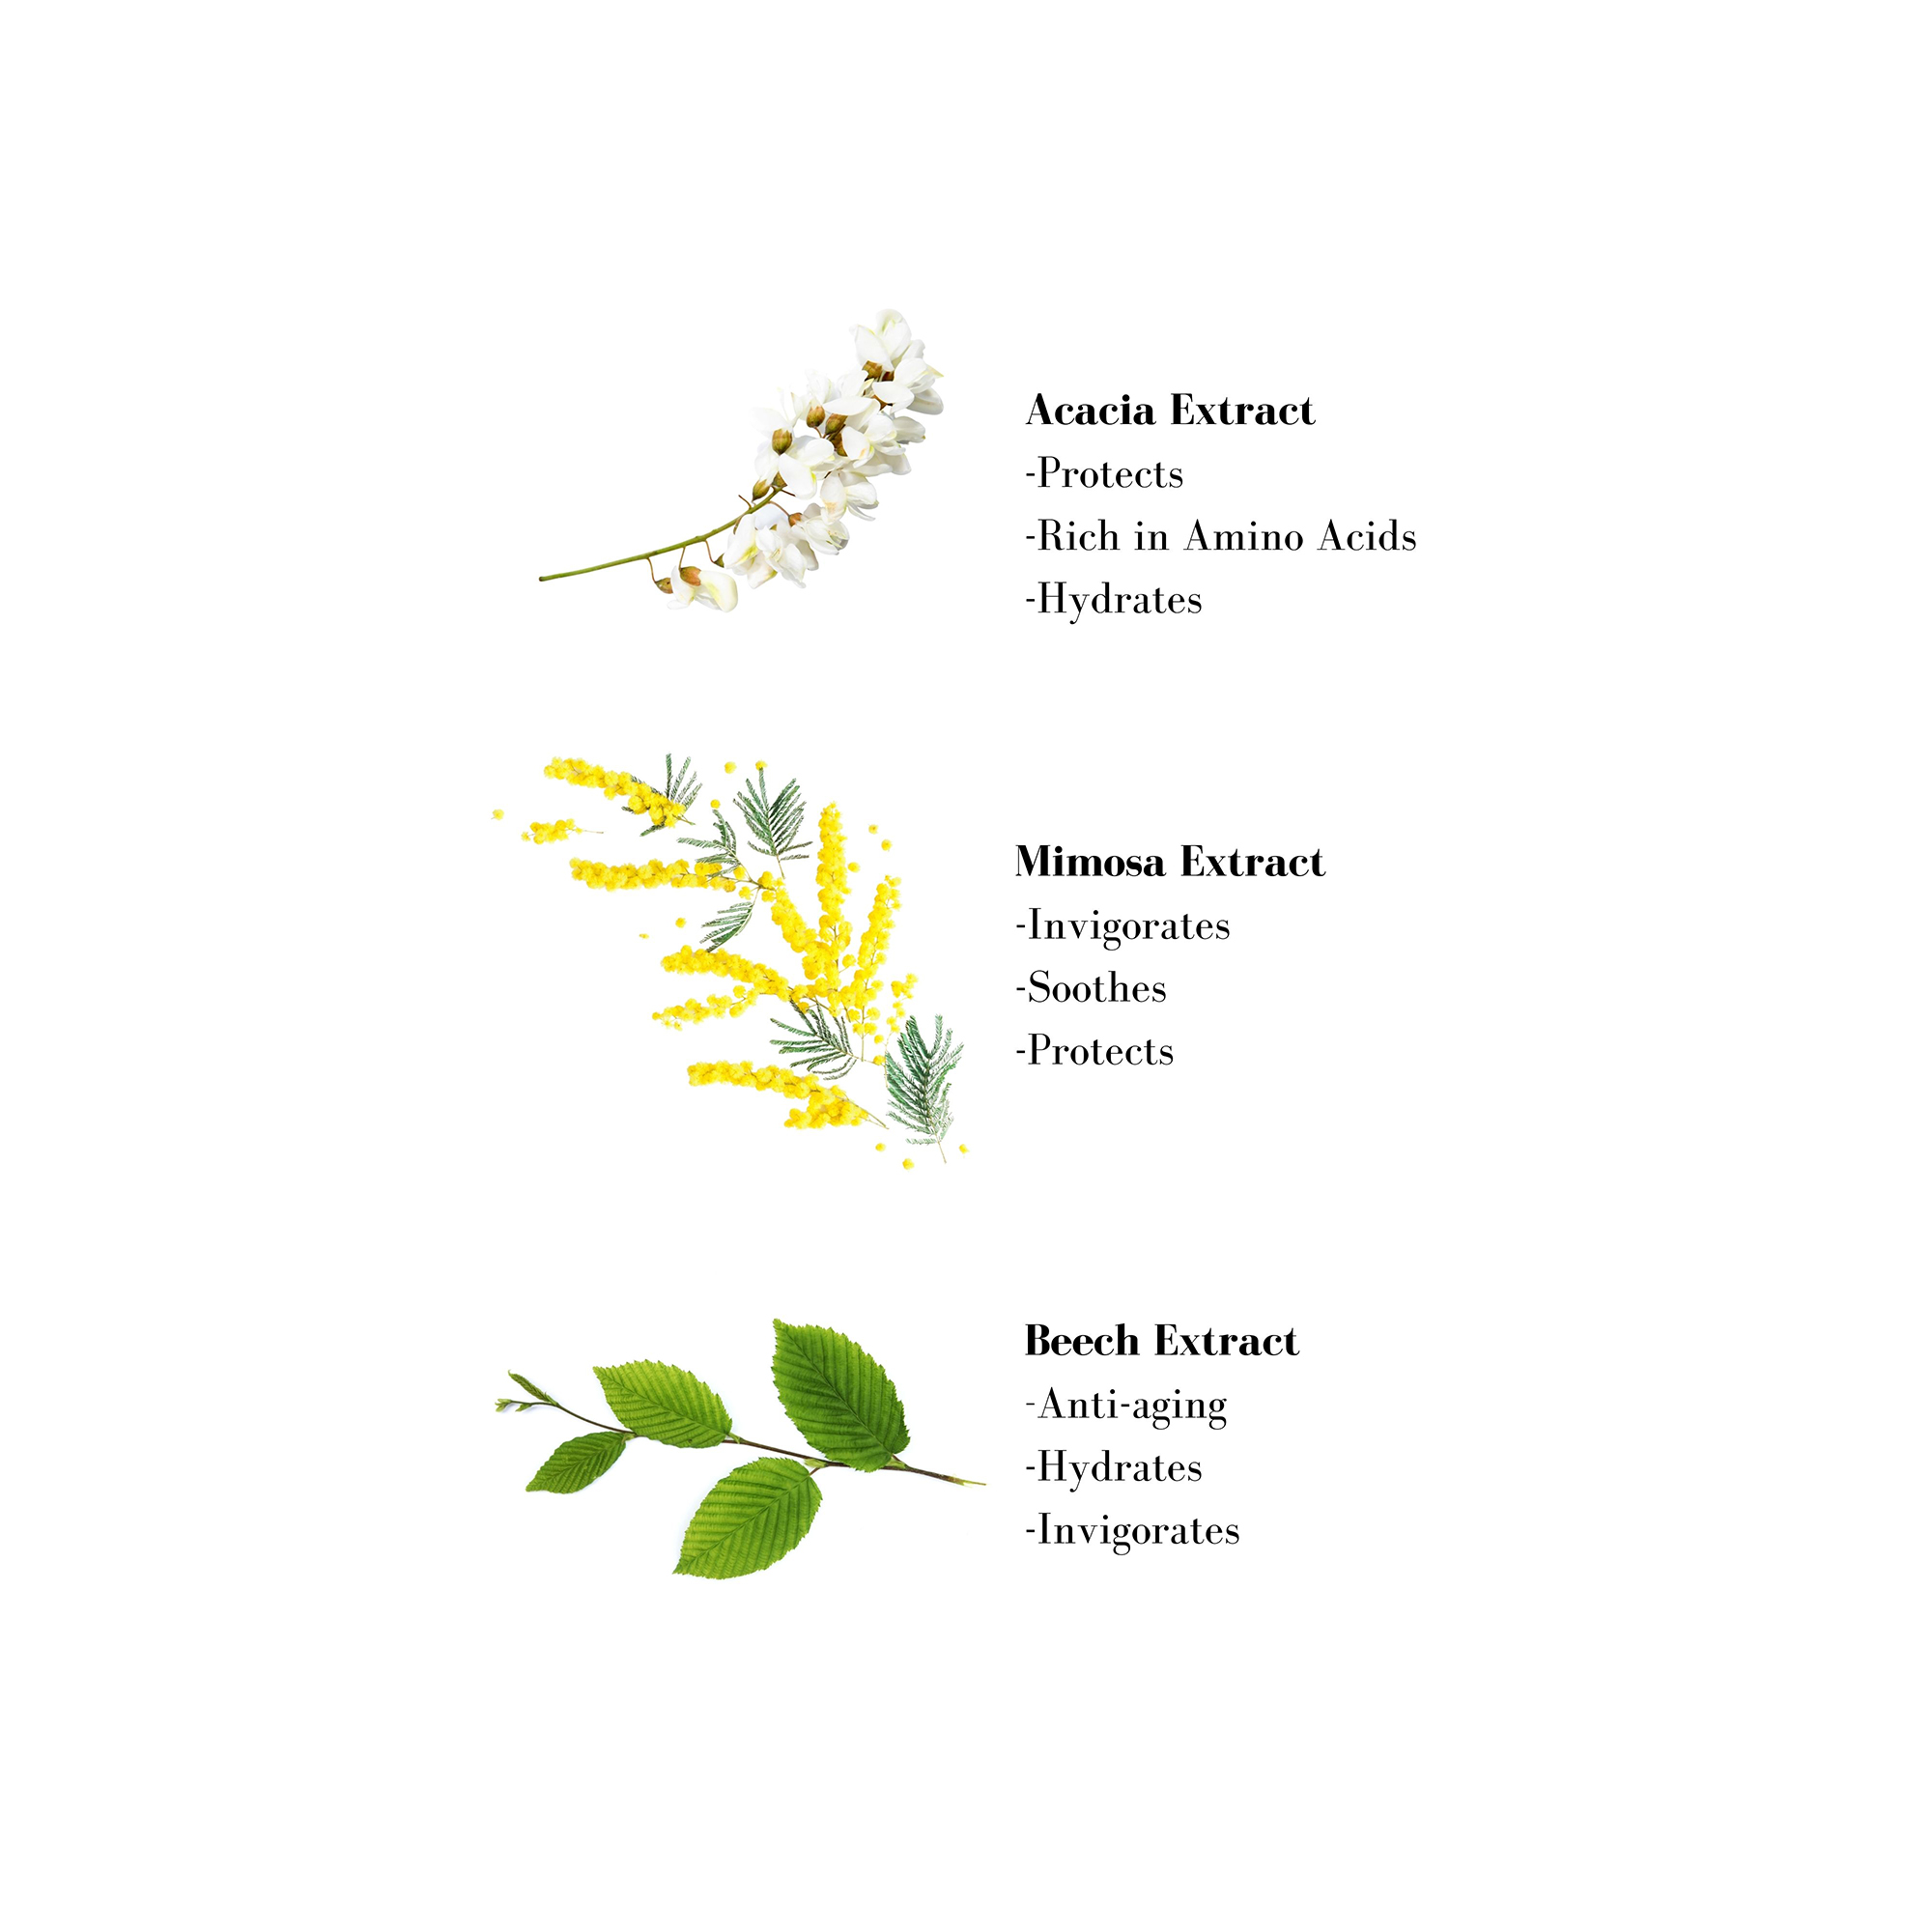 Image 1- Acacia Extract - Protects -Rich in Amino Acids -Hydrates Mimosa Extract -Invigorates -Soothes -Protects Beech Extract - Anti-aging -Hydrates -Invigorates